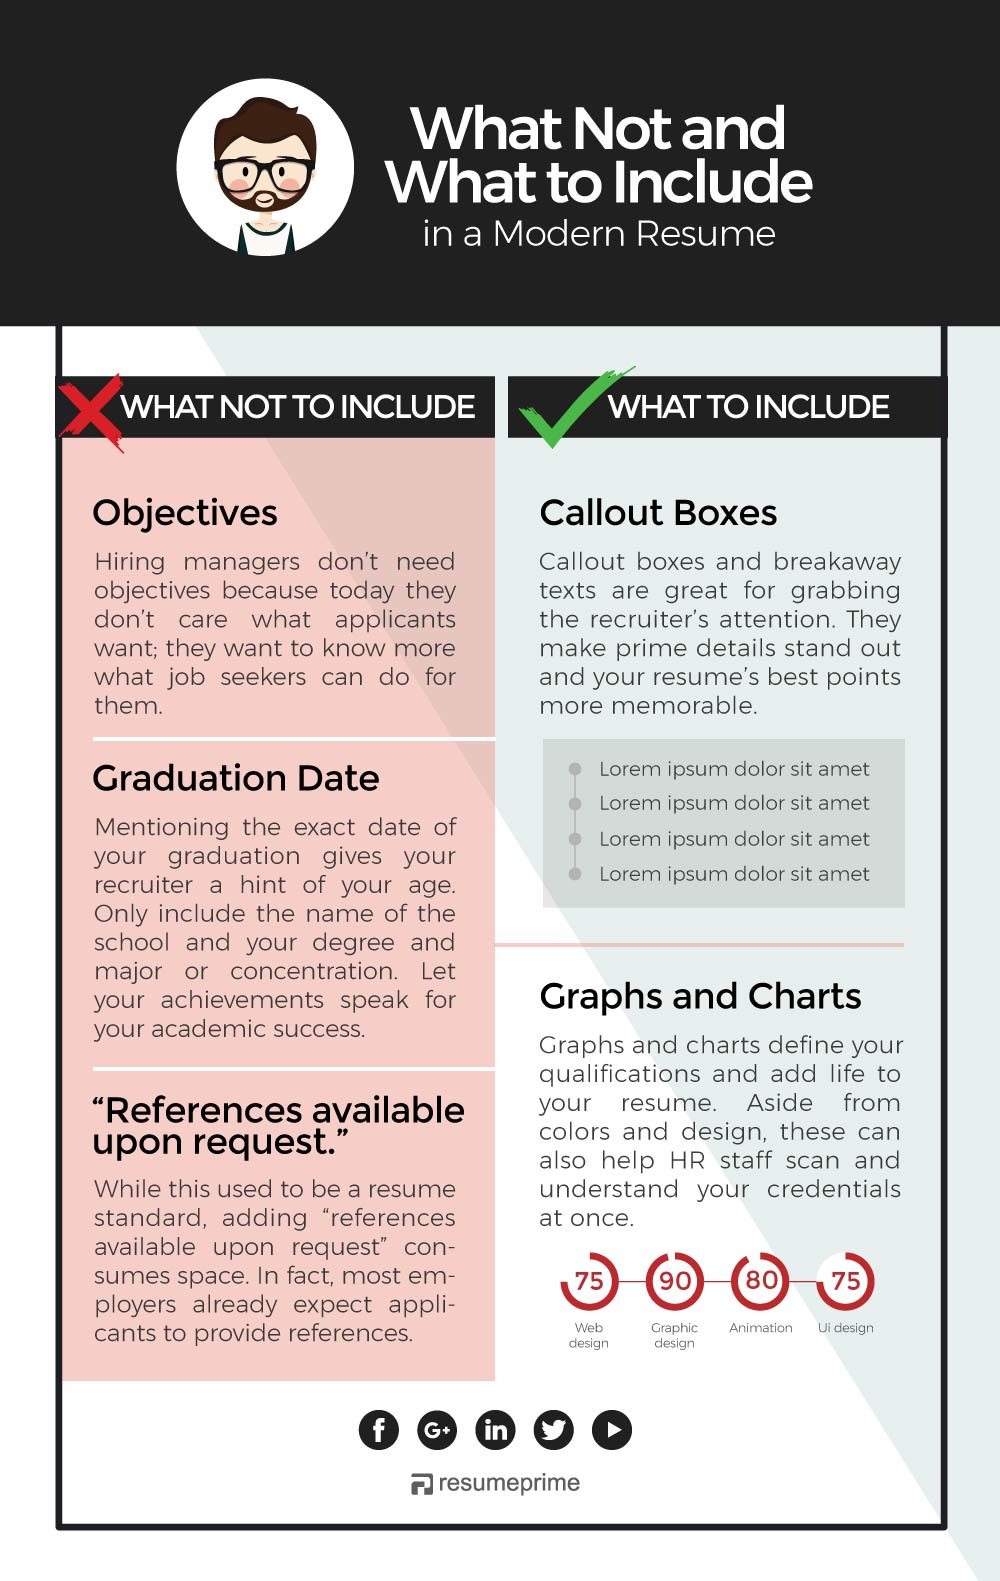 What Not and What to Include in a Modern Resume - Infographic - Resume Prime